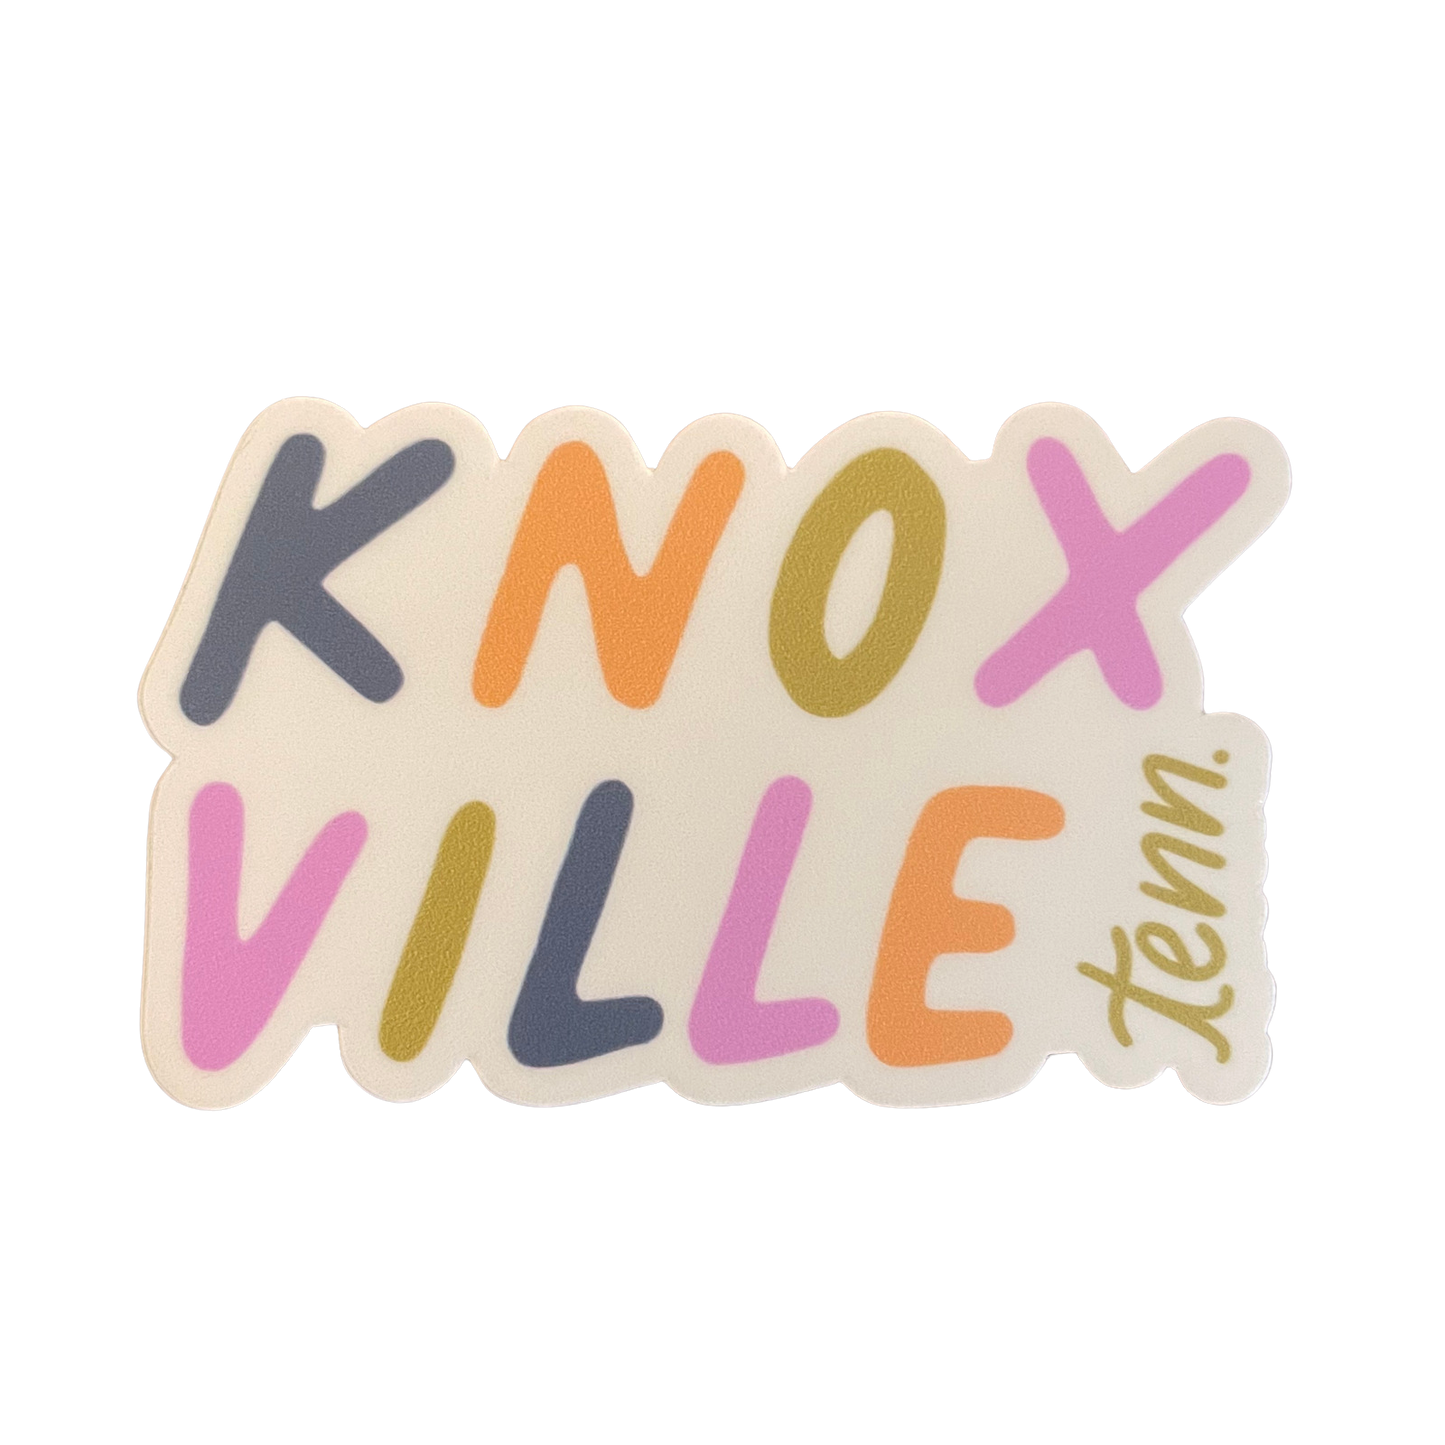 Knoxville Tenn Sticker by Paris Woodhull